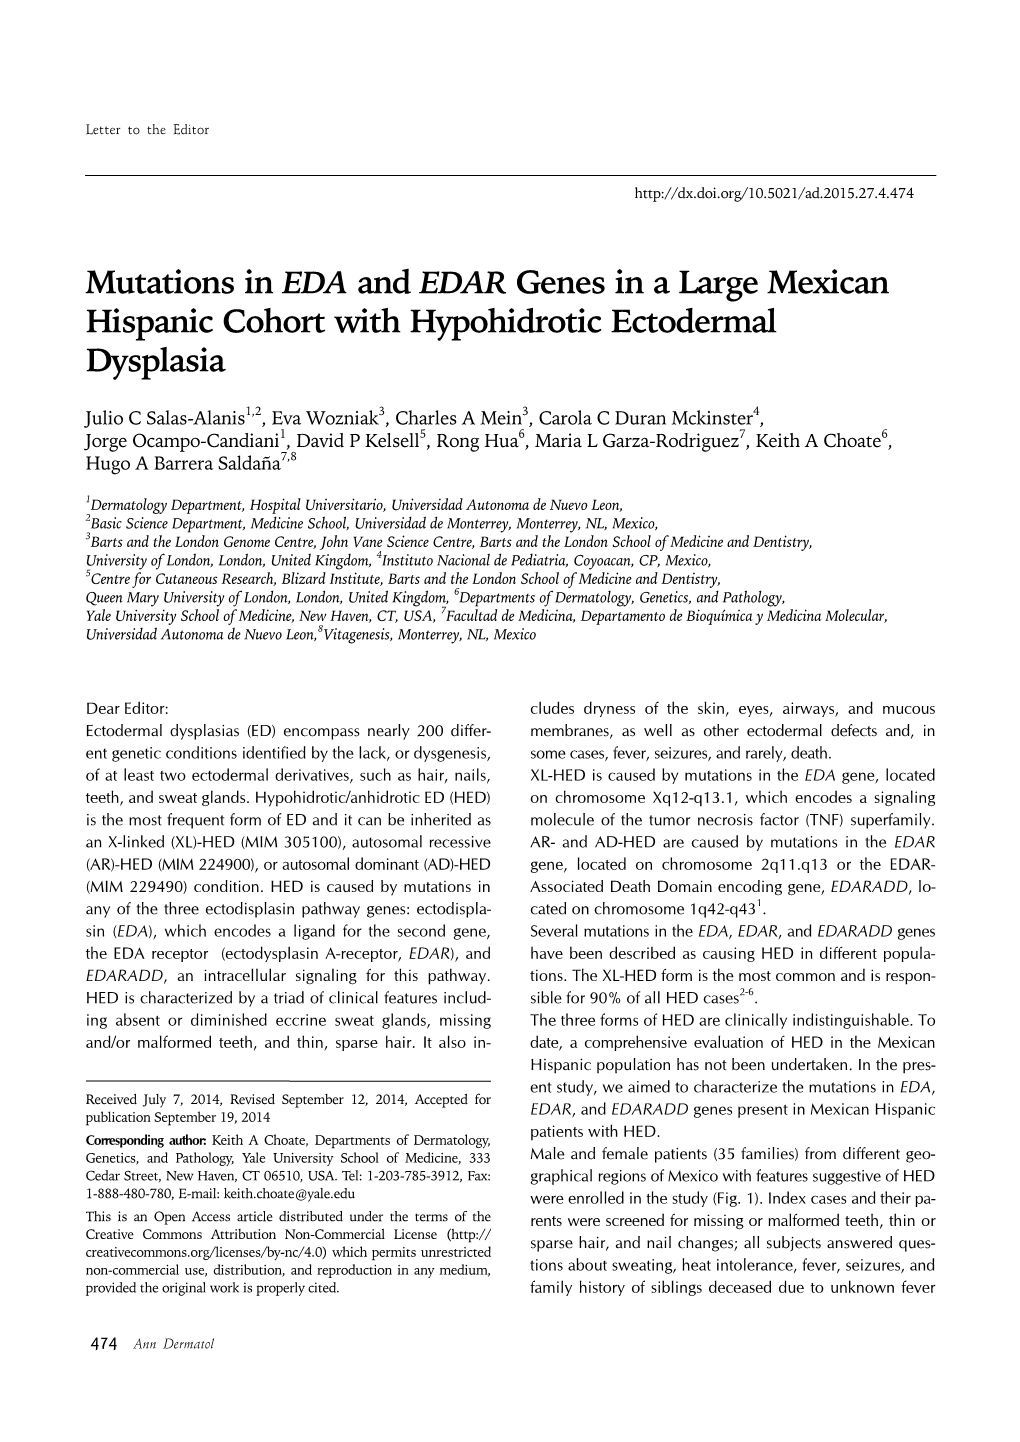 Mutations in EDA and EDAR Genes in a Large Mexican Hispanic Cohort with Hypohidrotic Ectodermal Dysplasia